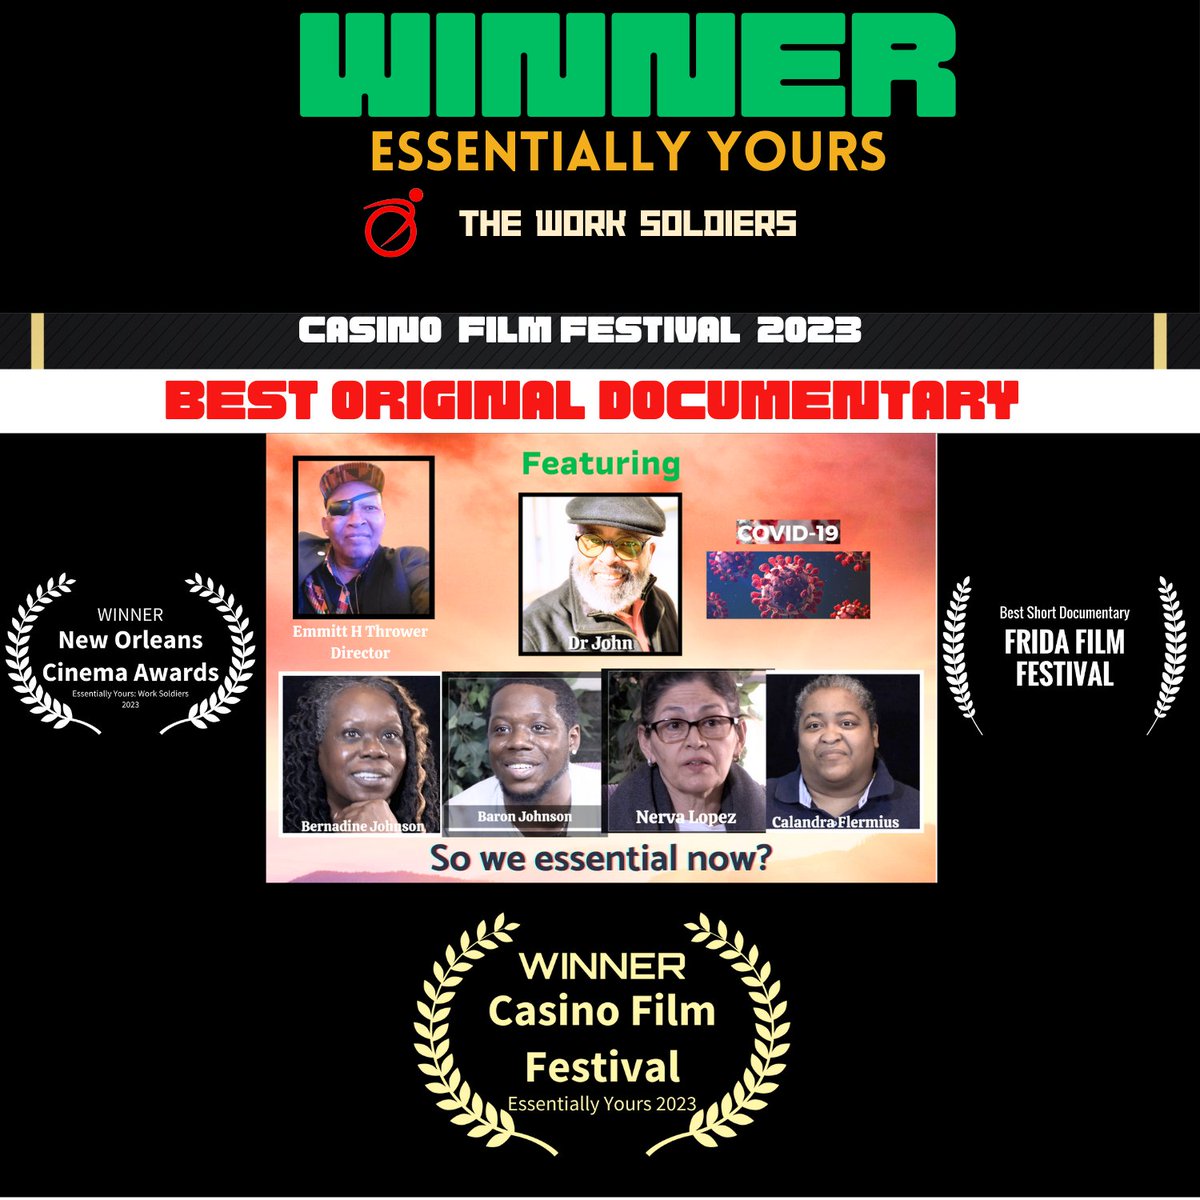 We Won! ESSENTIALLY YOUR: The WorkSoldiers Best Original Documentary Mental Health and Covid 19 @dasoultoucha @tylerperry @TPstudios @IssaRae #pandemic #essentialworkers #mentalhealth #disabled #disability #disabilities #Bronx #award @WabiSabiProd @pigsinabowl #festival